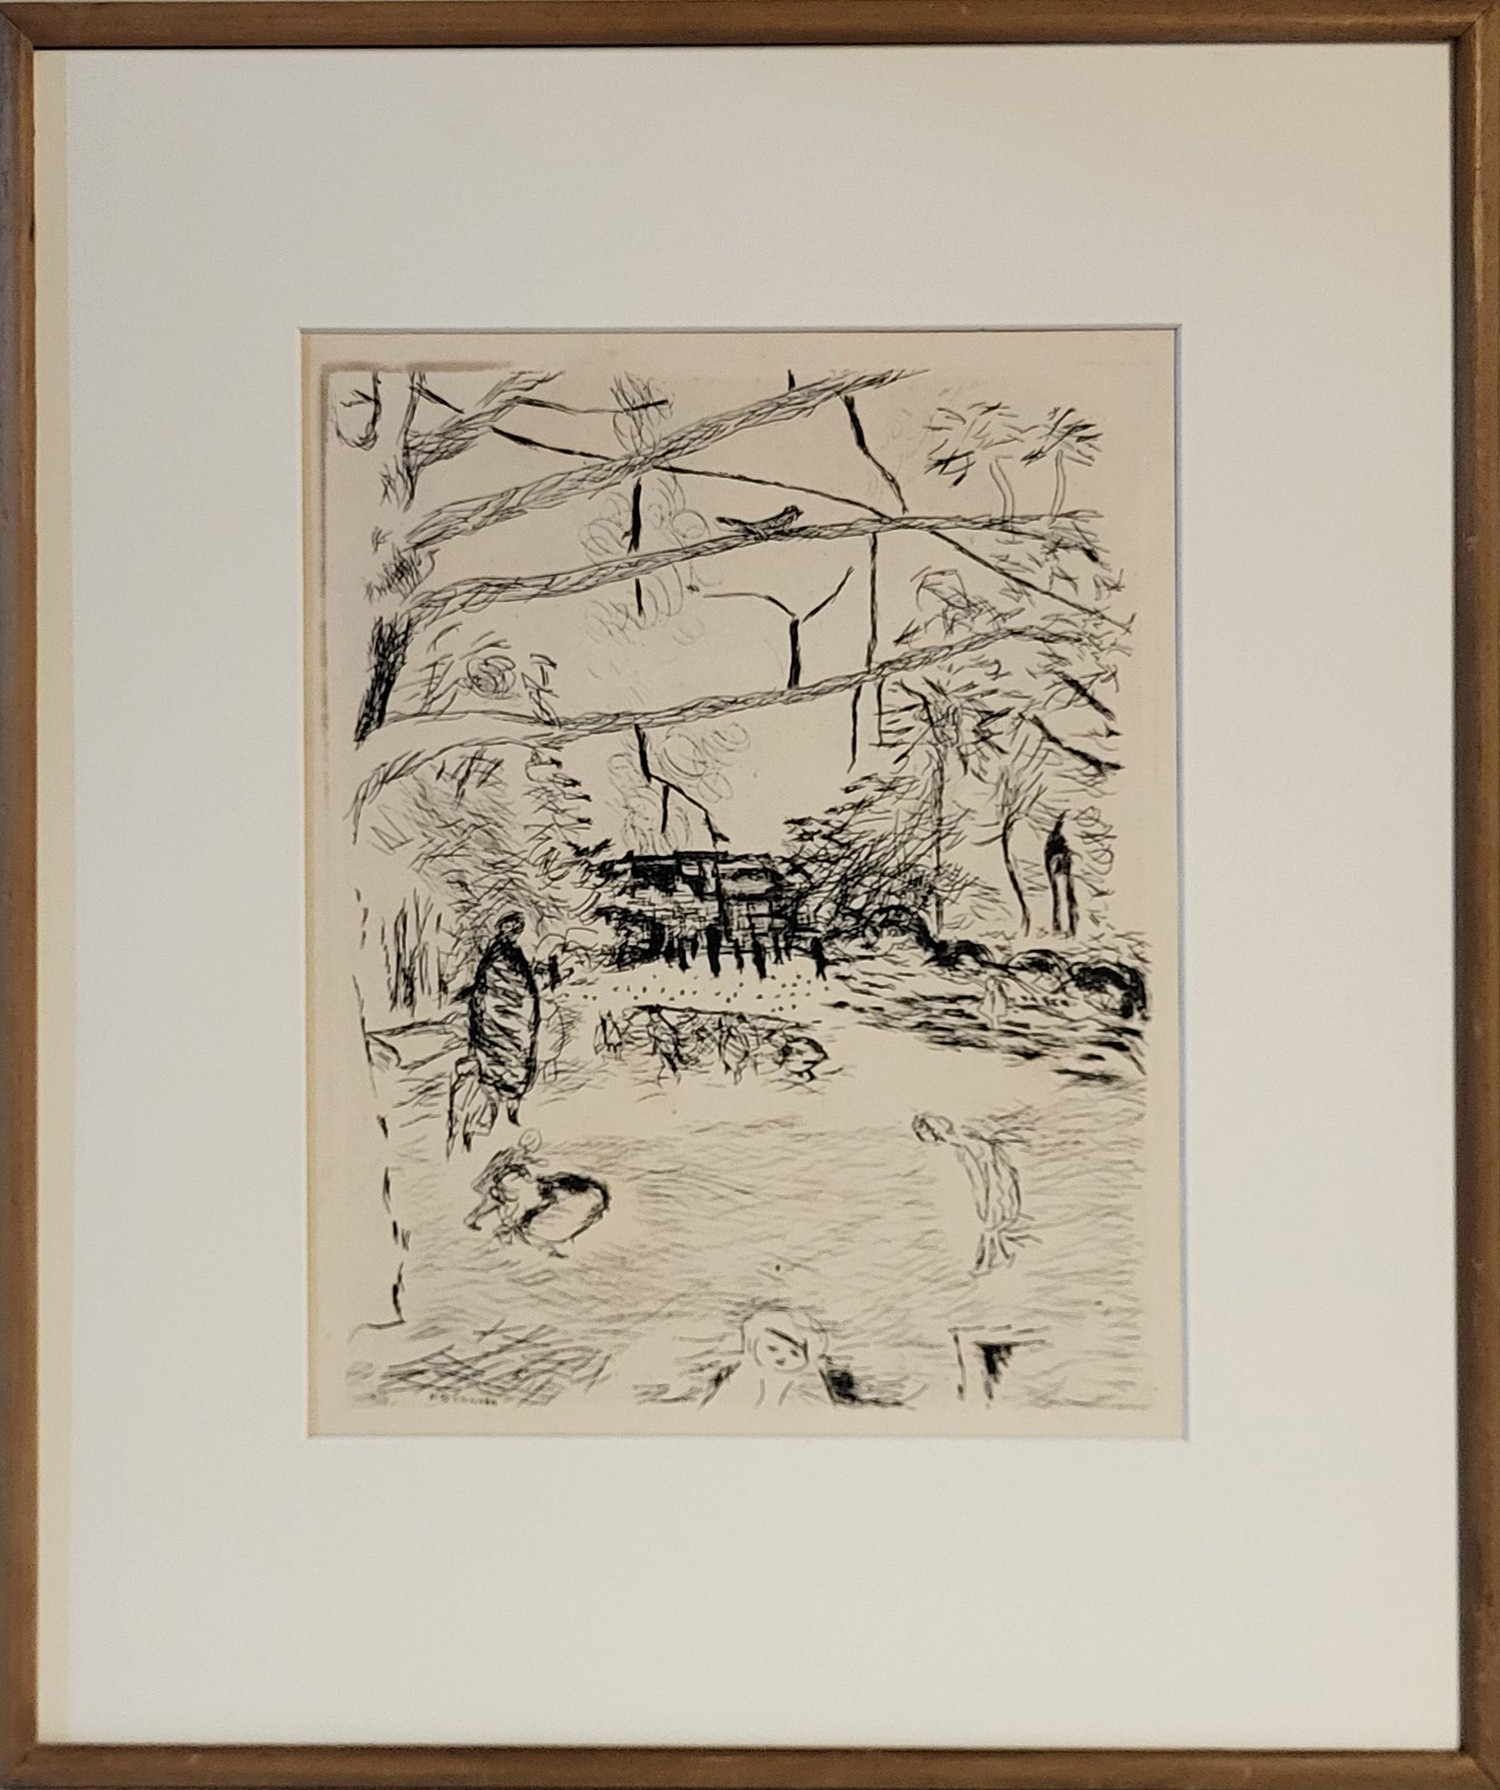 PIERRE BONNARD,1867 - 1947, A BLACK AND WHITE ETCHING Titled 'Le Parc Monceau', 1937, signed in - Image 3 of 5